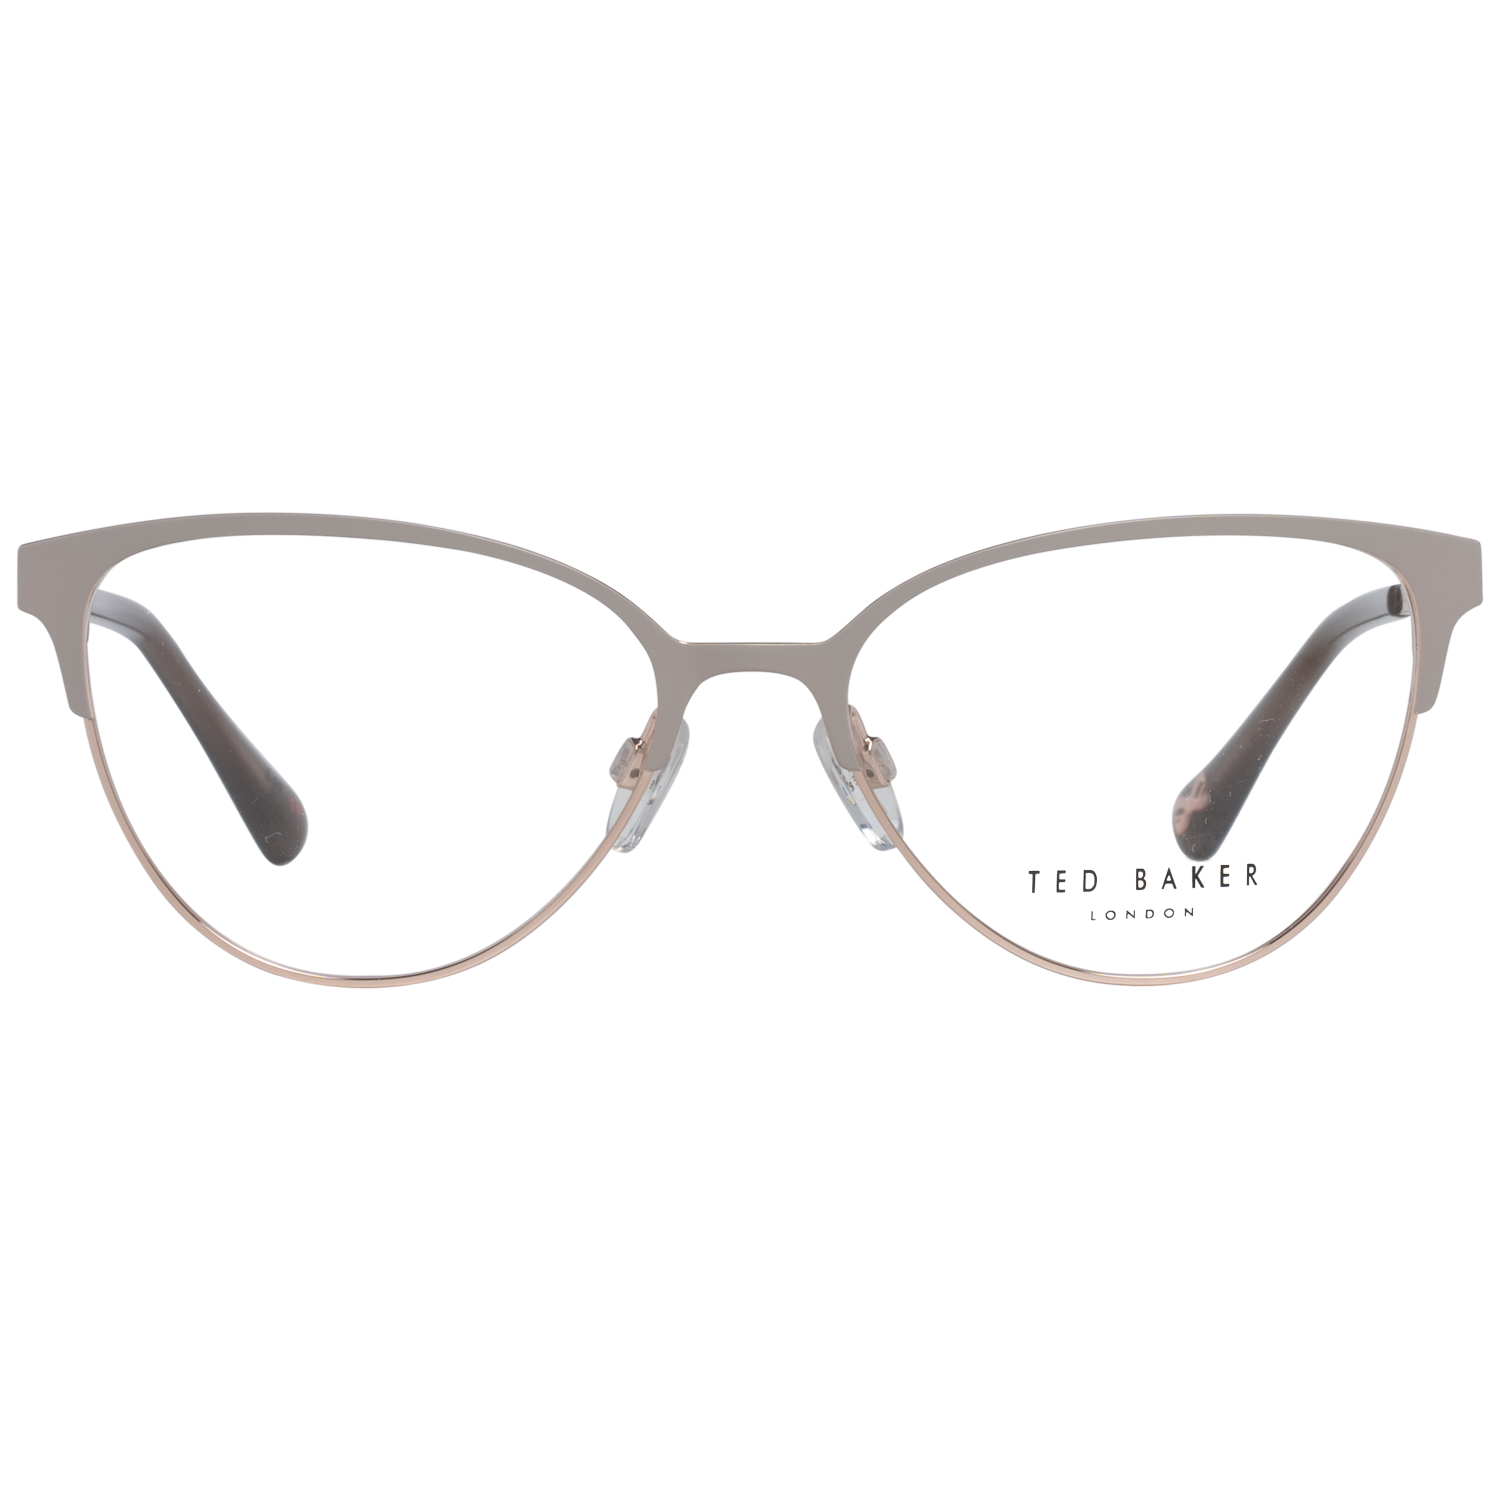 GenderWomenMain colorBeigeFrame colorGoldFrame materialMetalSize53-16-140Lenses width53mmLenses heigth40mmBridge length16mmFrame width132mmTemple length140mmShipment includesCase, Cleaning clothStyleFull-RimSpring hingeNo